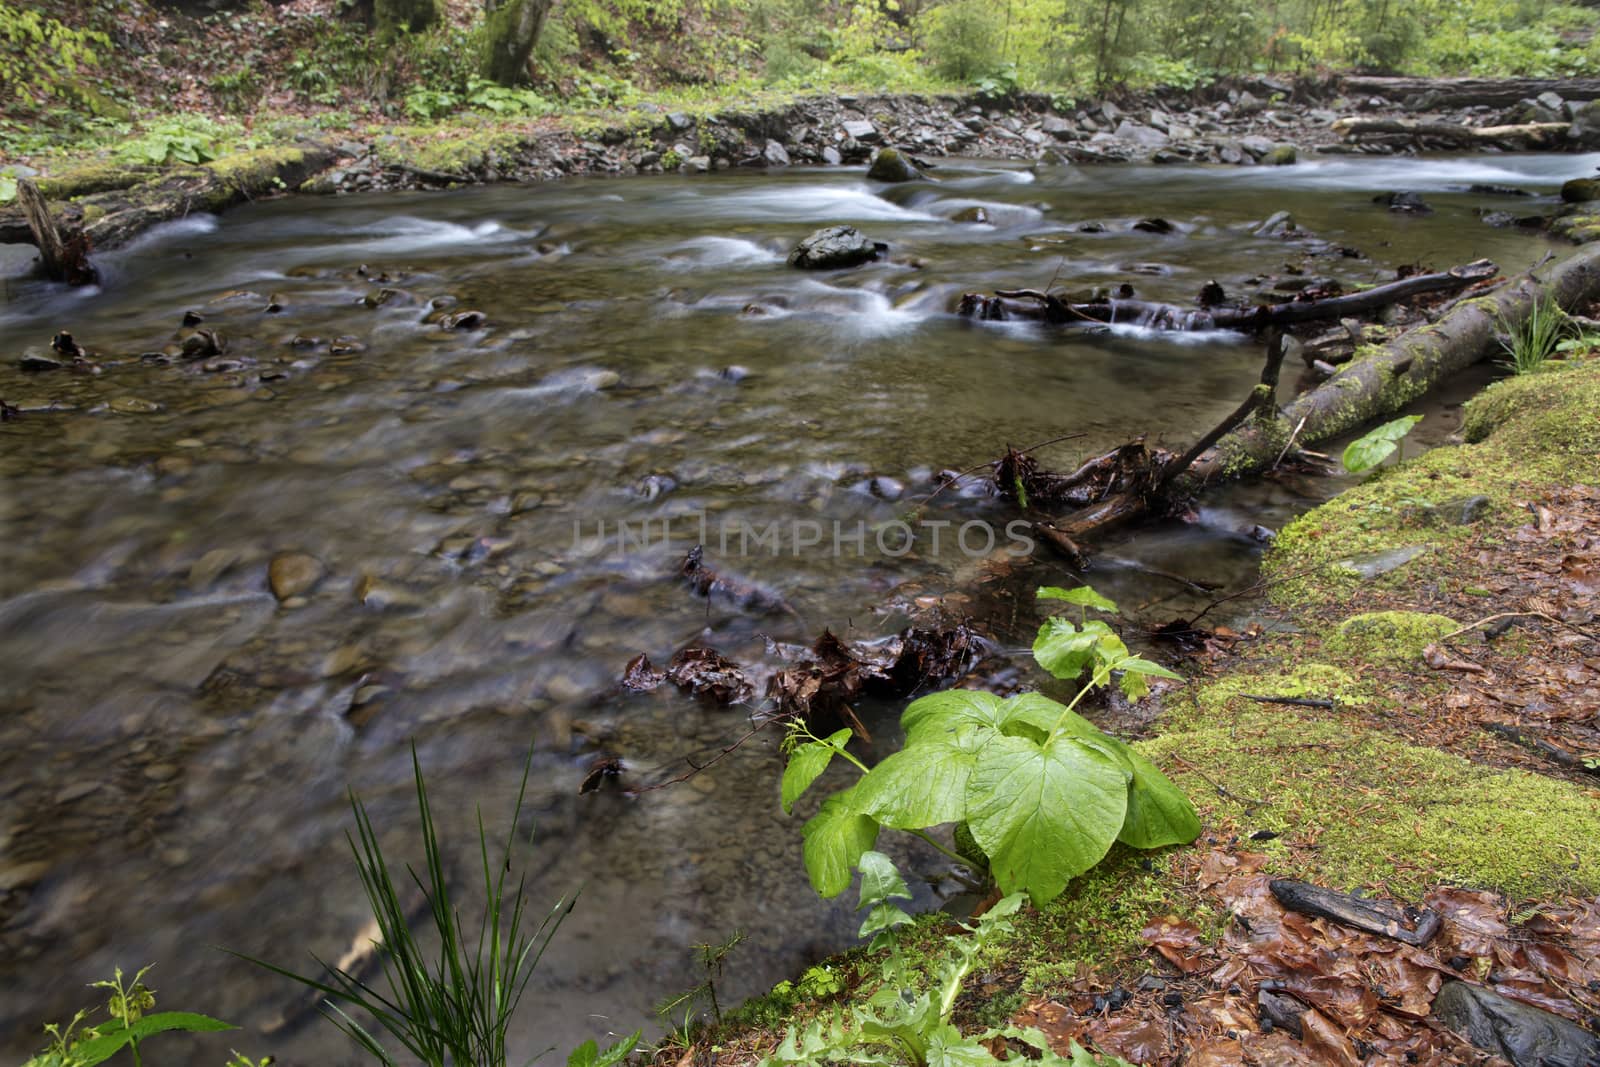 In the forest, at the water's edge, a small young plant grows on the shore of swift mountain river.